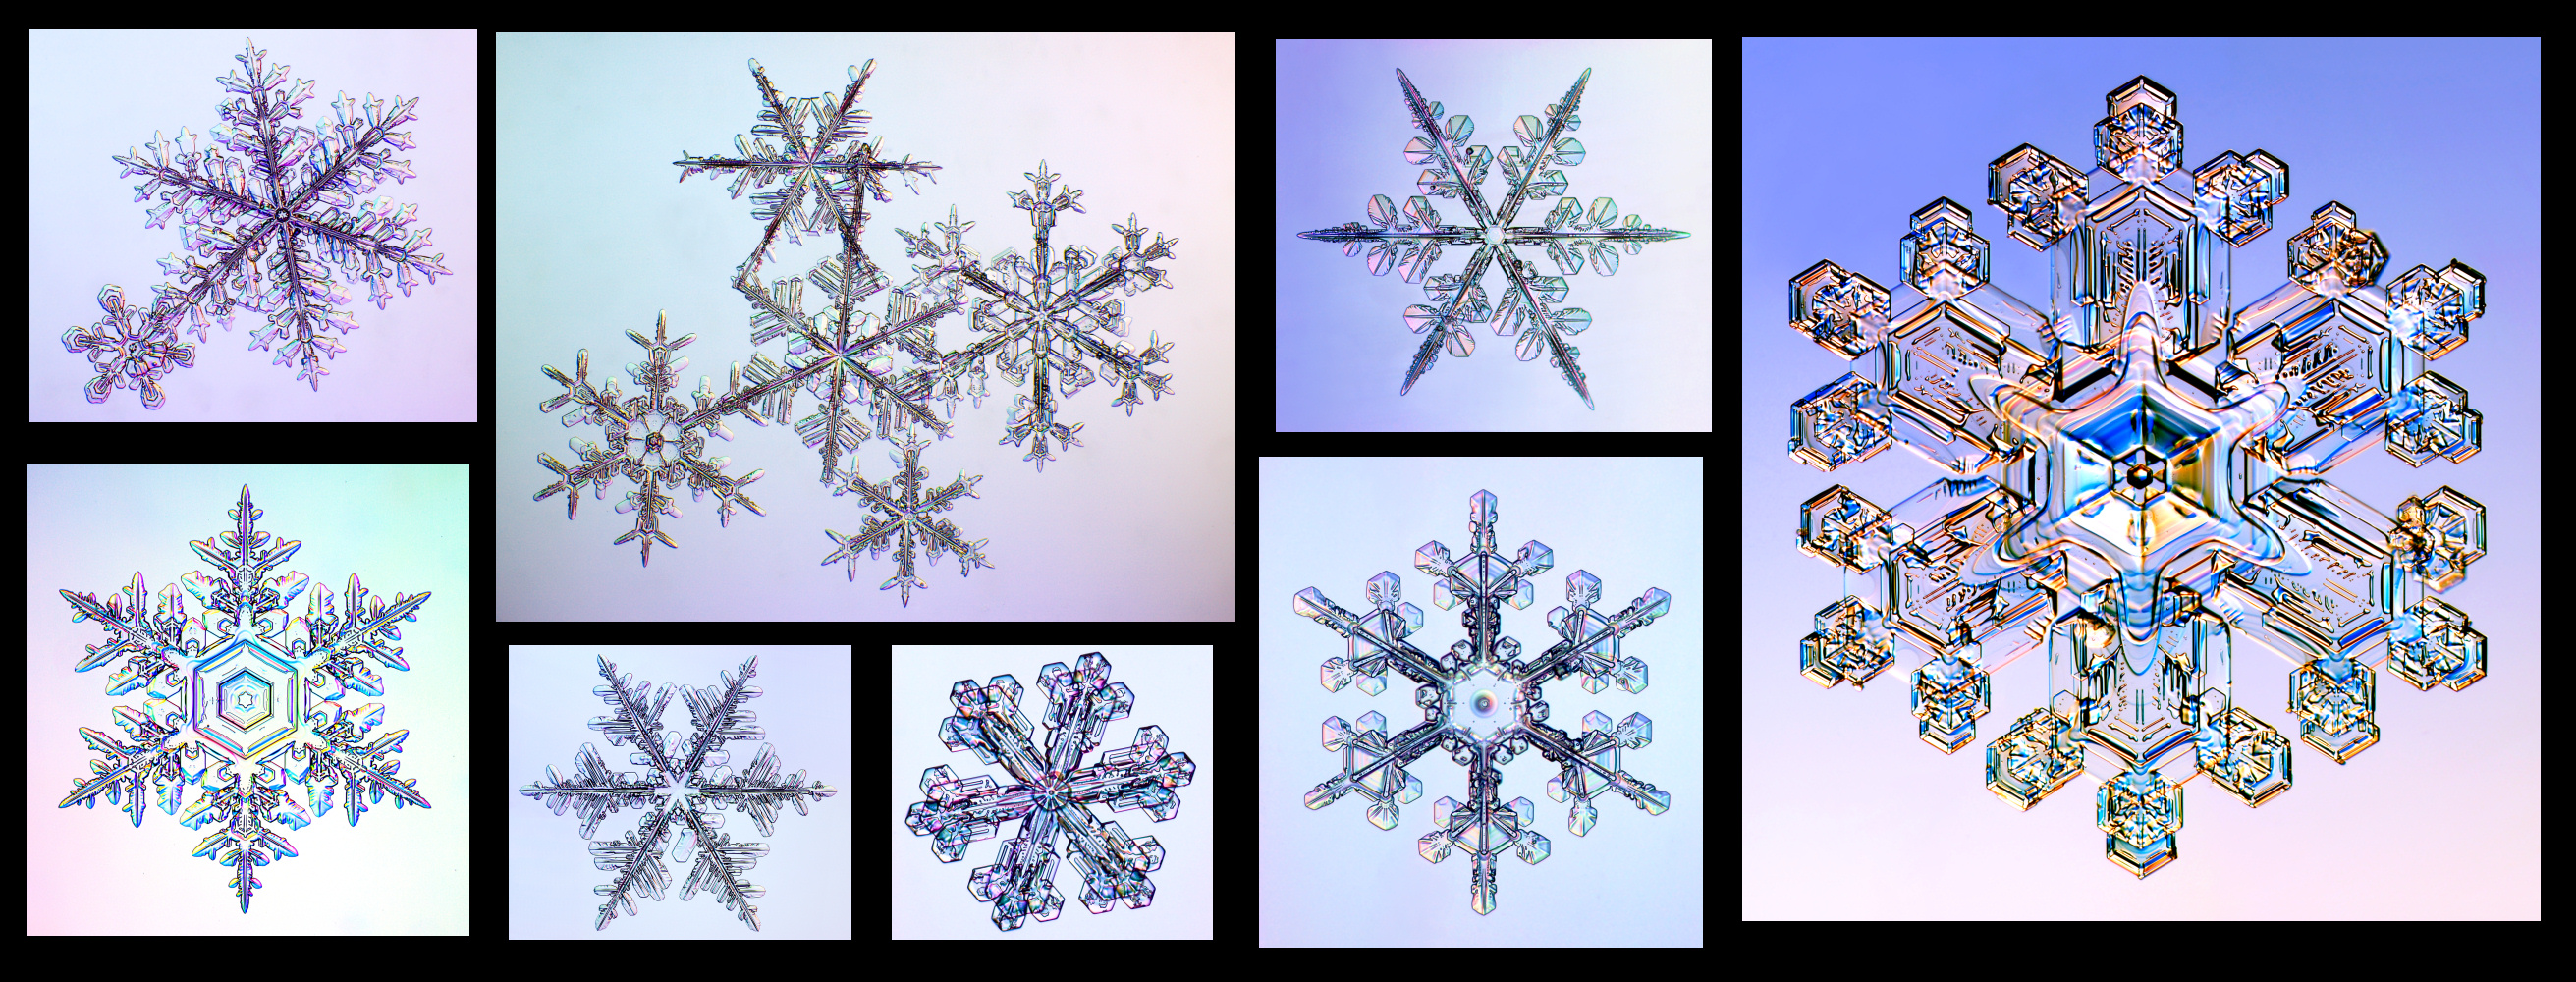 Why snowflakes come in beautiful, different shapes